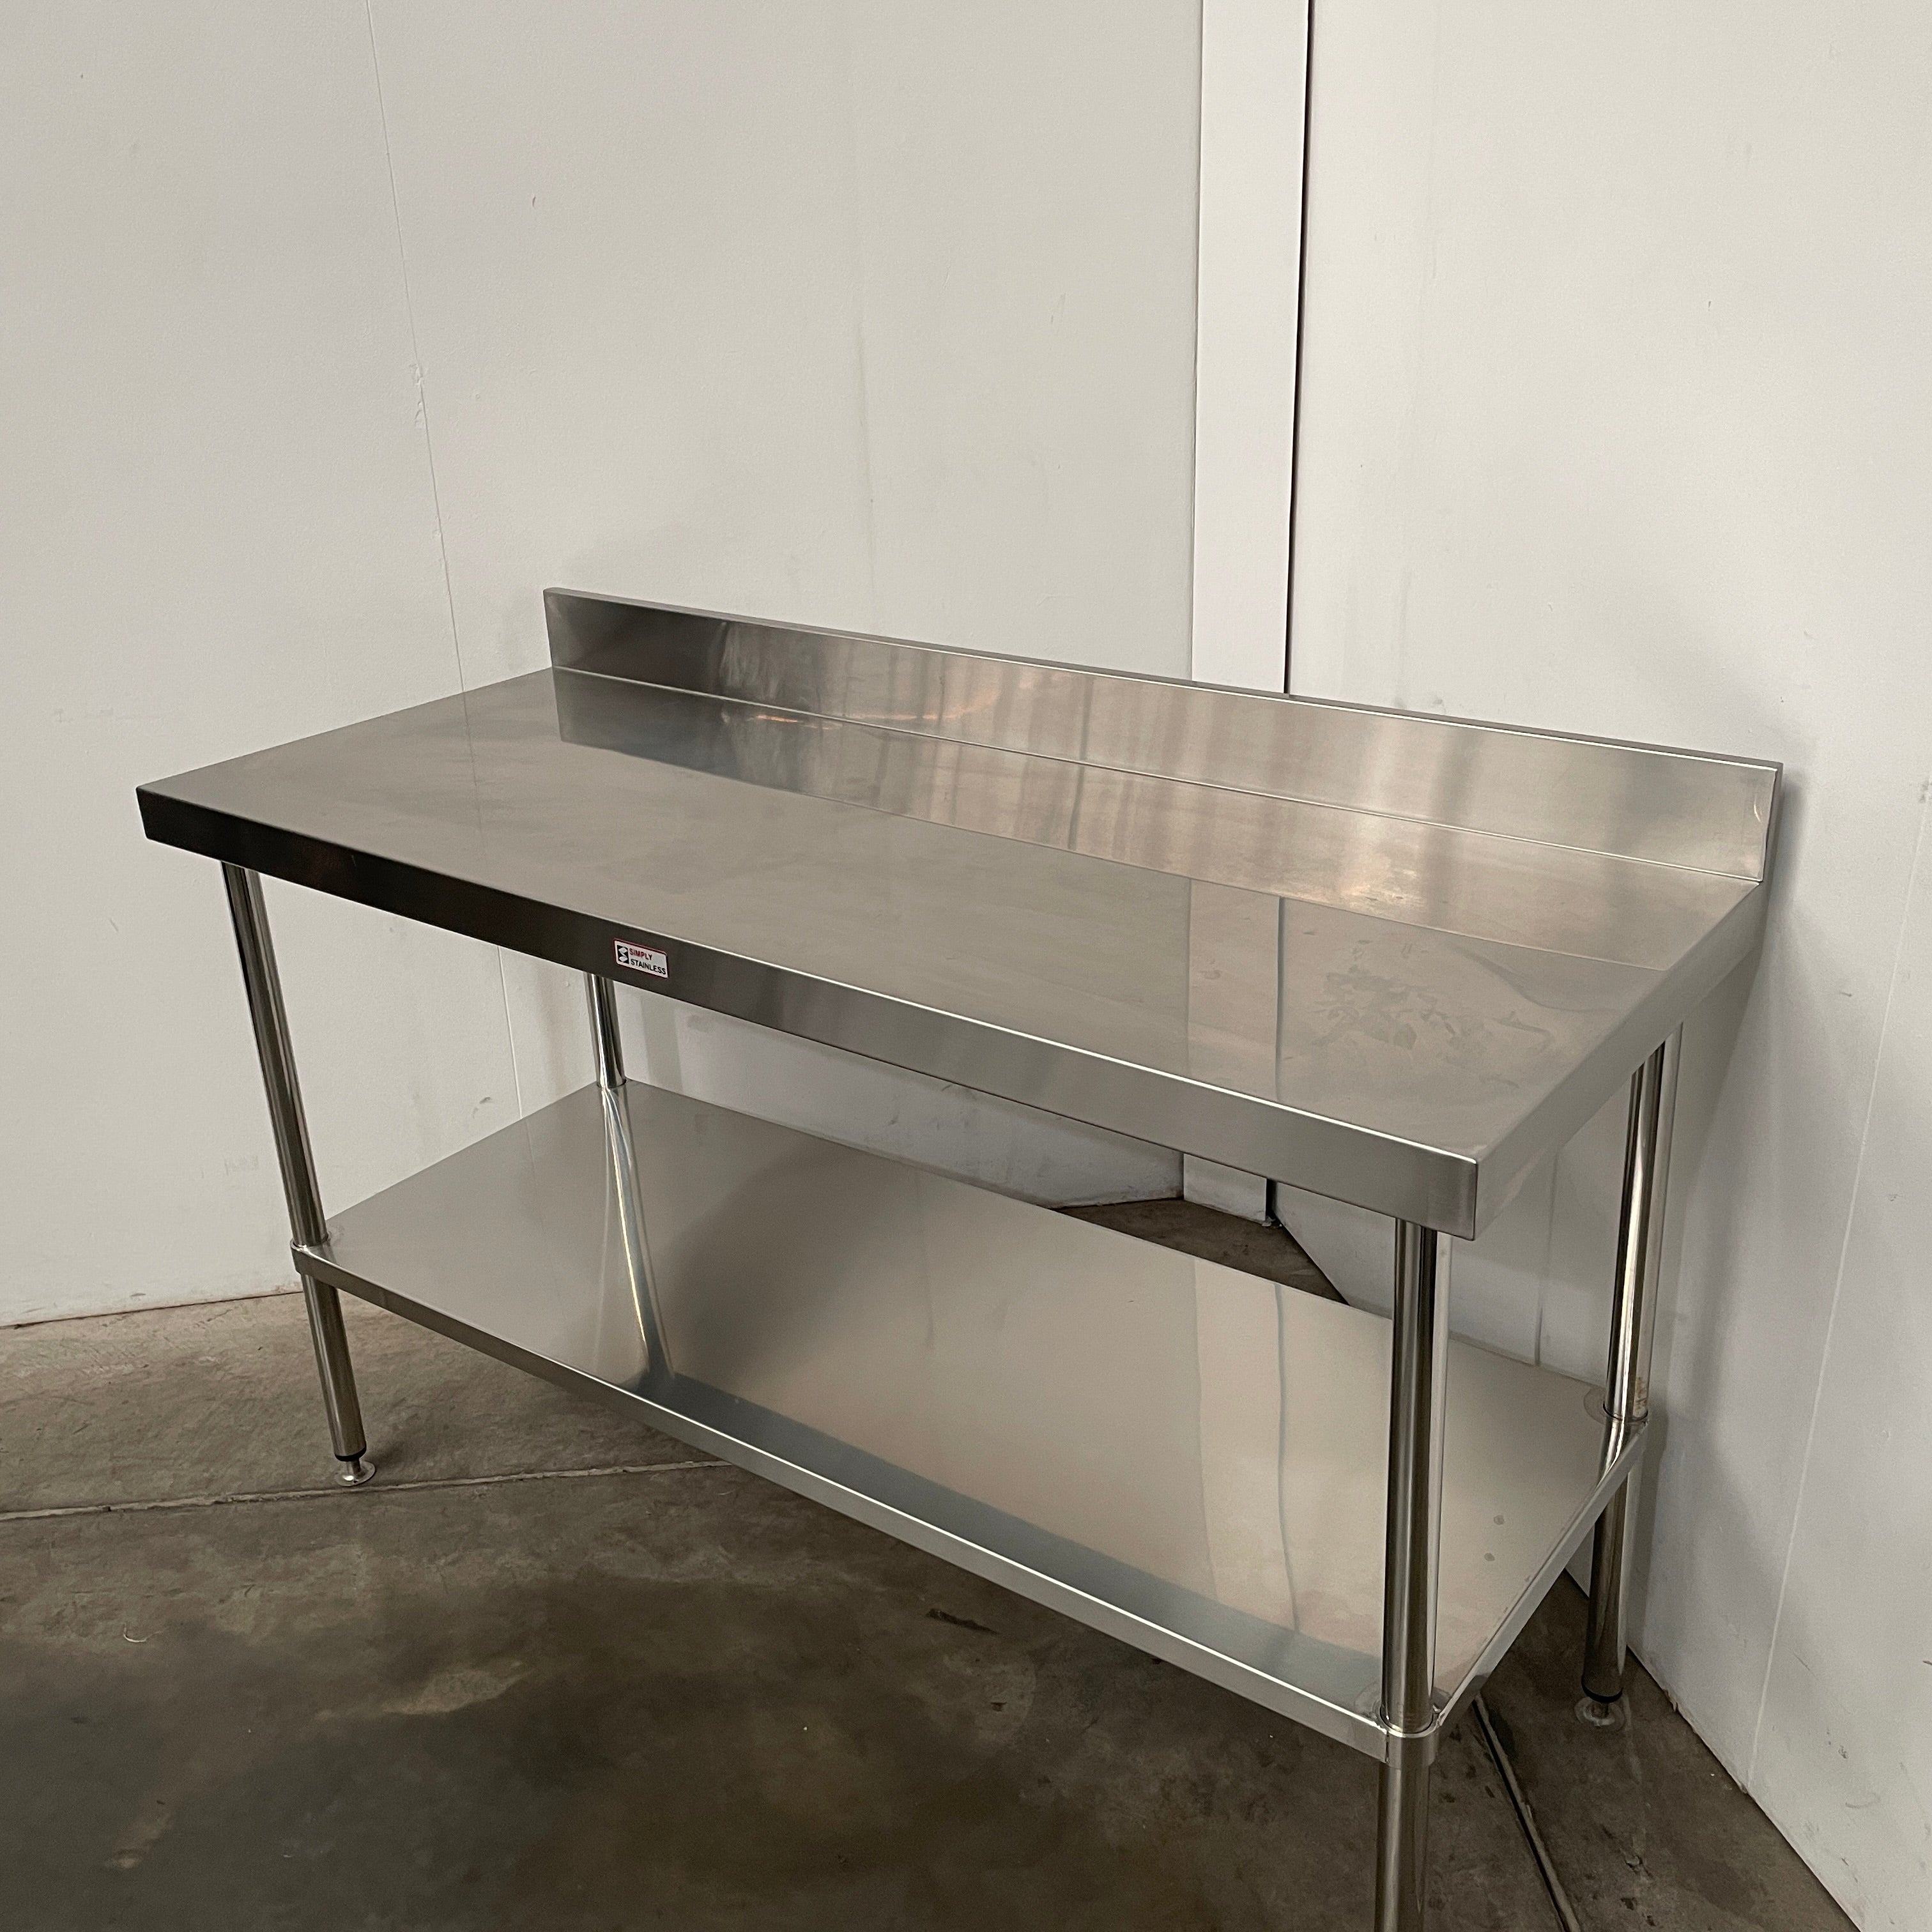 Thumbnail - Simply Stainless SS02.6.1500 Stainless Steel Bench with Splashback